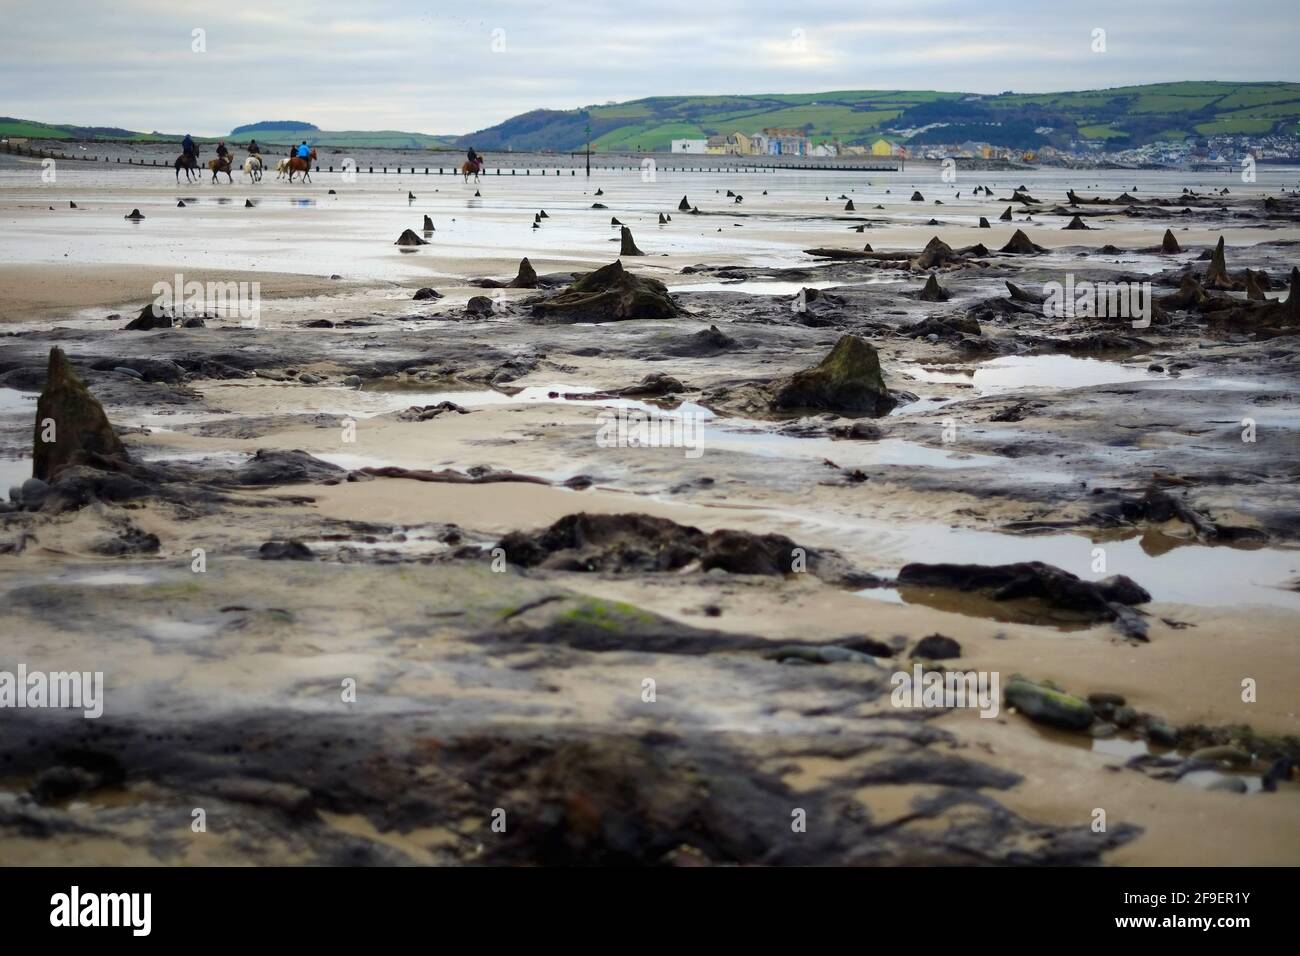 Submerged prehistoric forest, Borth, Wales revealed by stormy seas Stock Photo